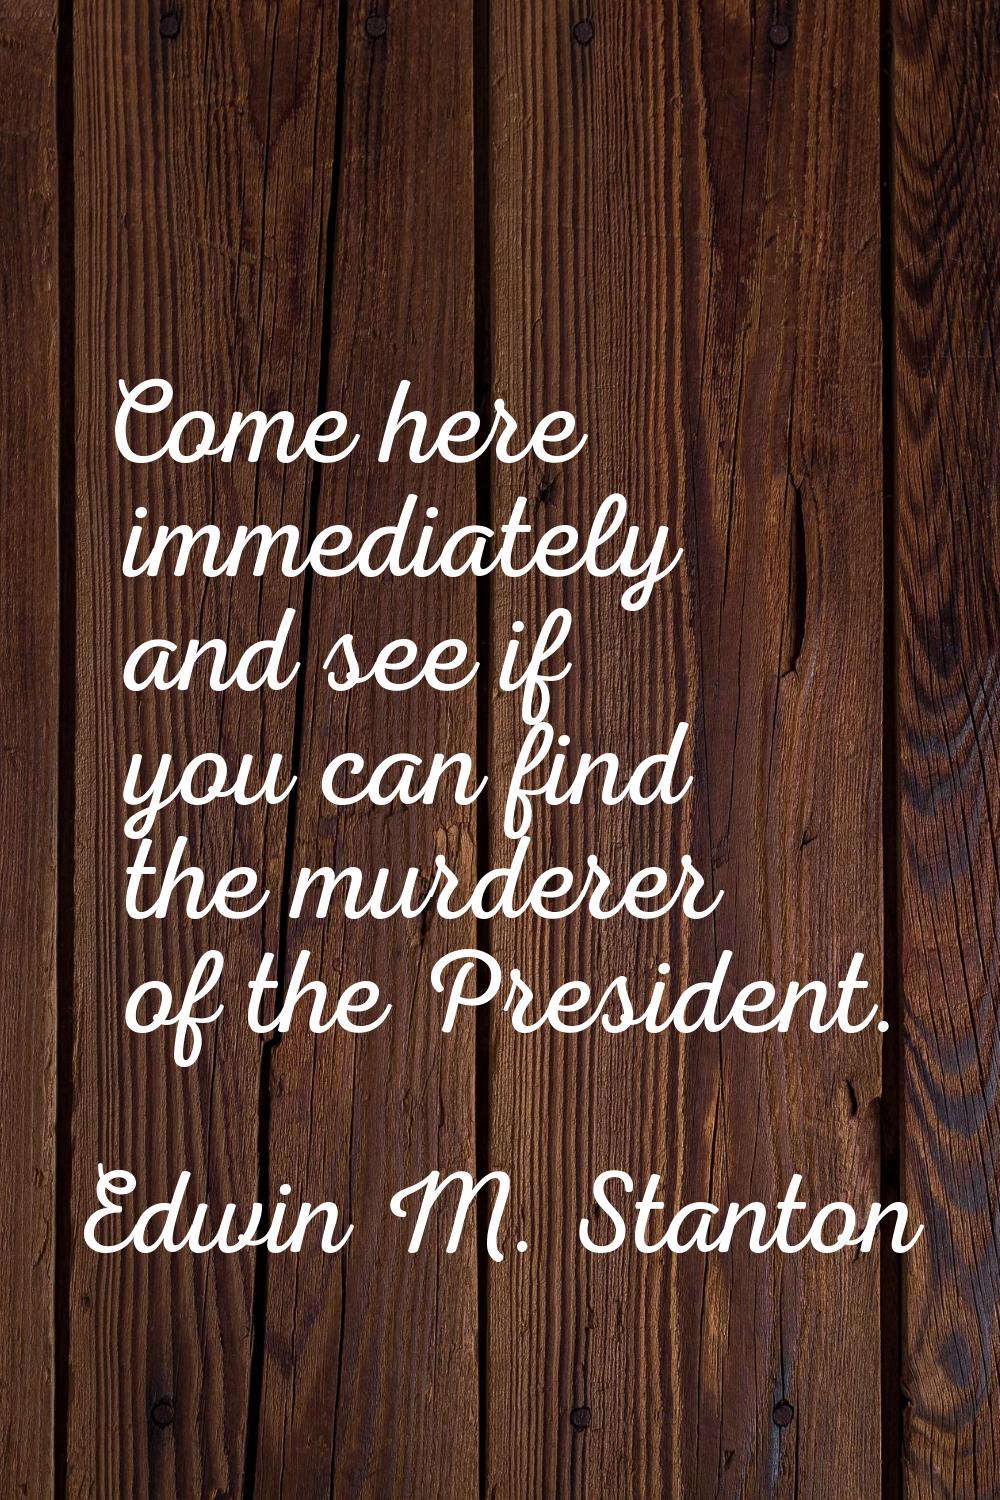 Come here immediately and see if you can find the murderer of the President.